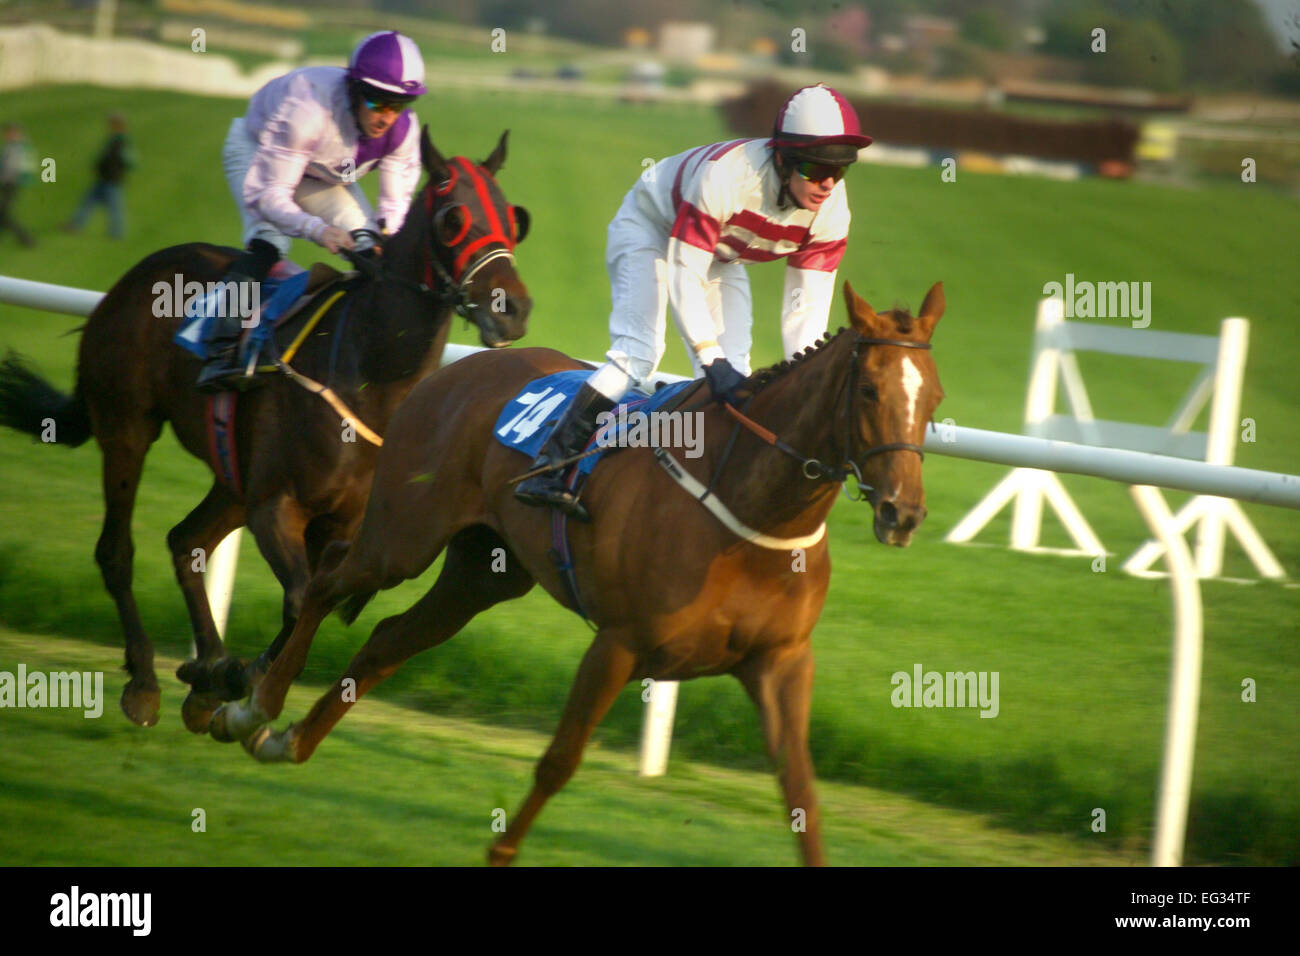 Horse racing at Catterick racecourse Stock Photo